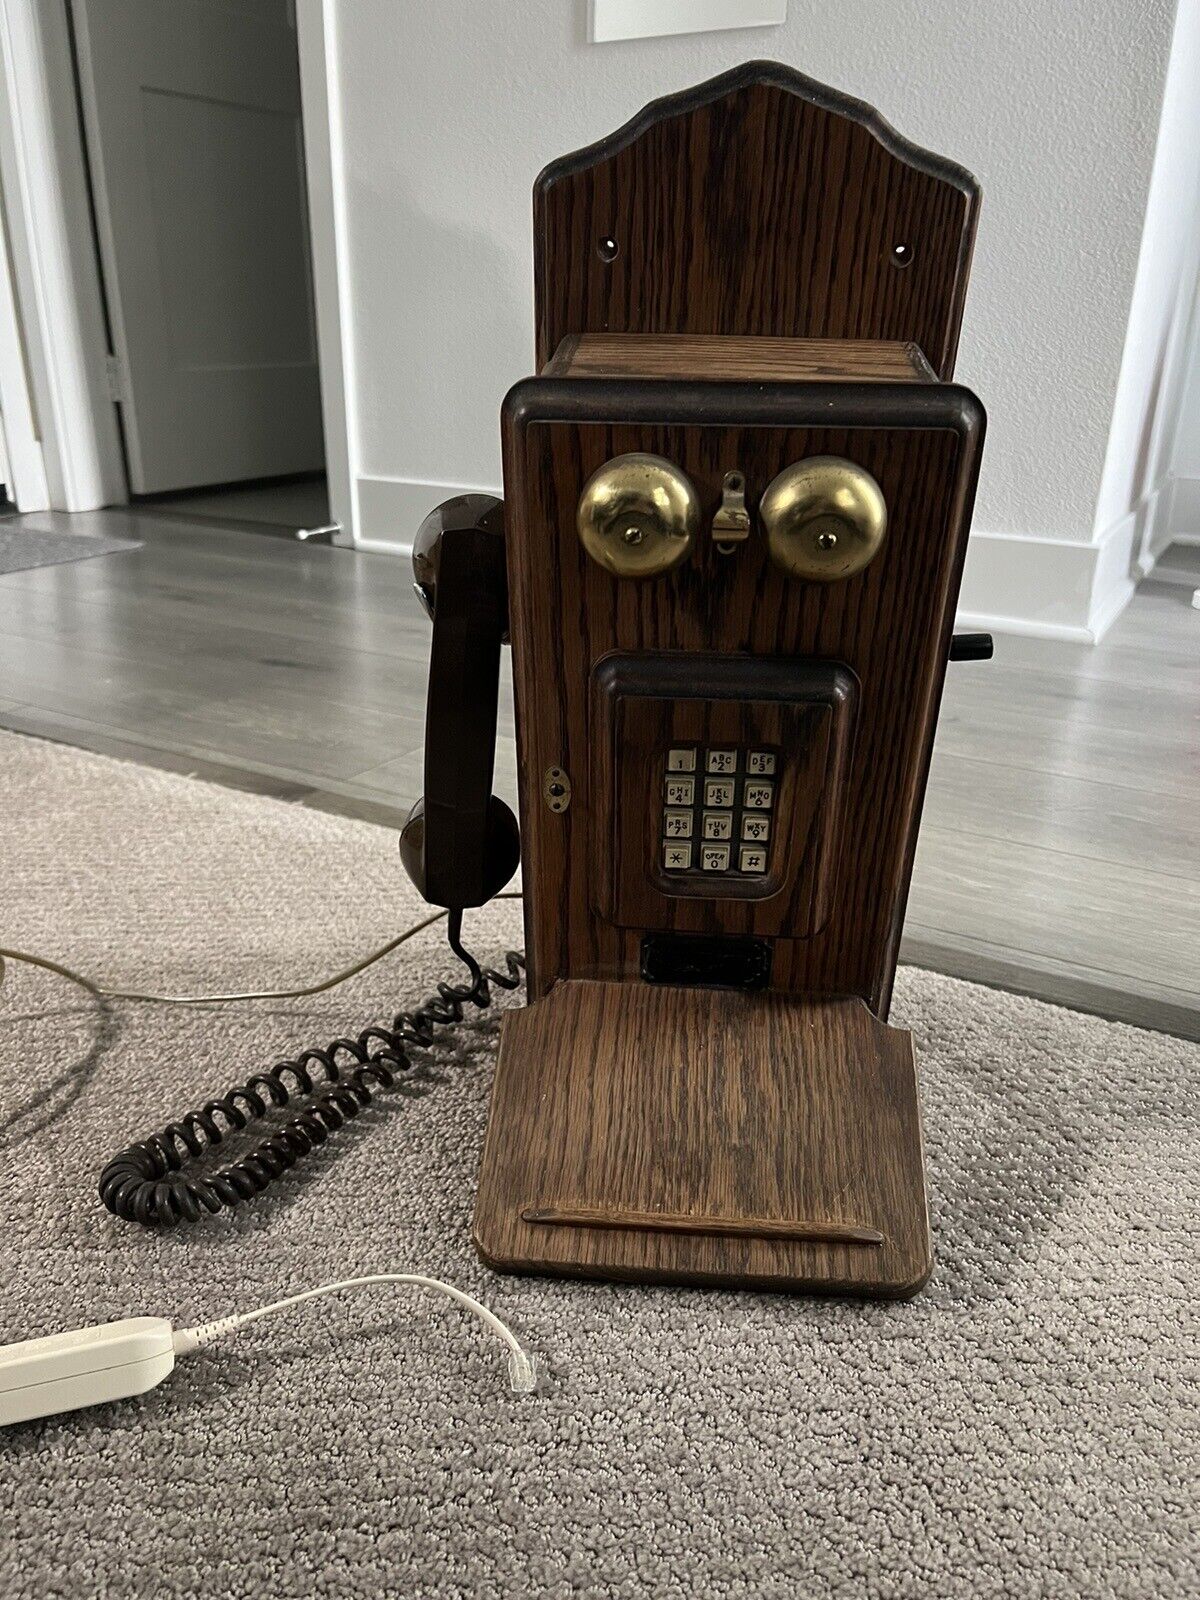 VTG Phone Wood Box Wall Mount Antique Telephone With Buttons Oak/Gold UNTESTED